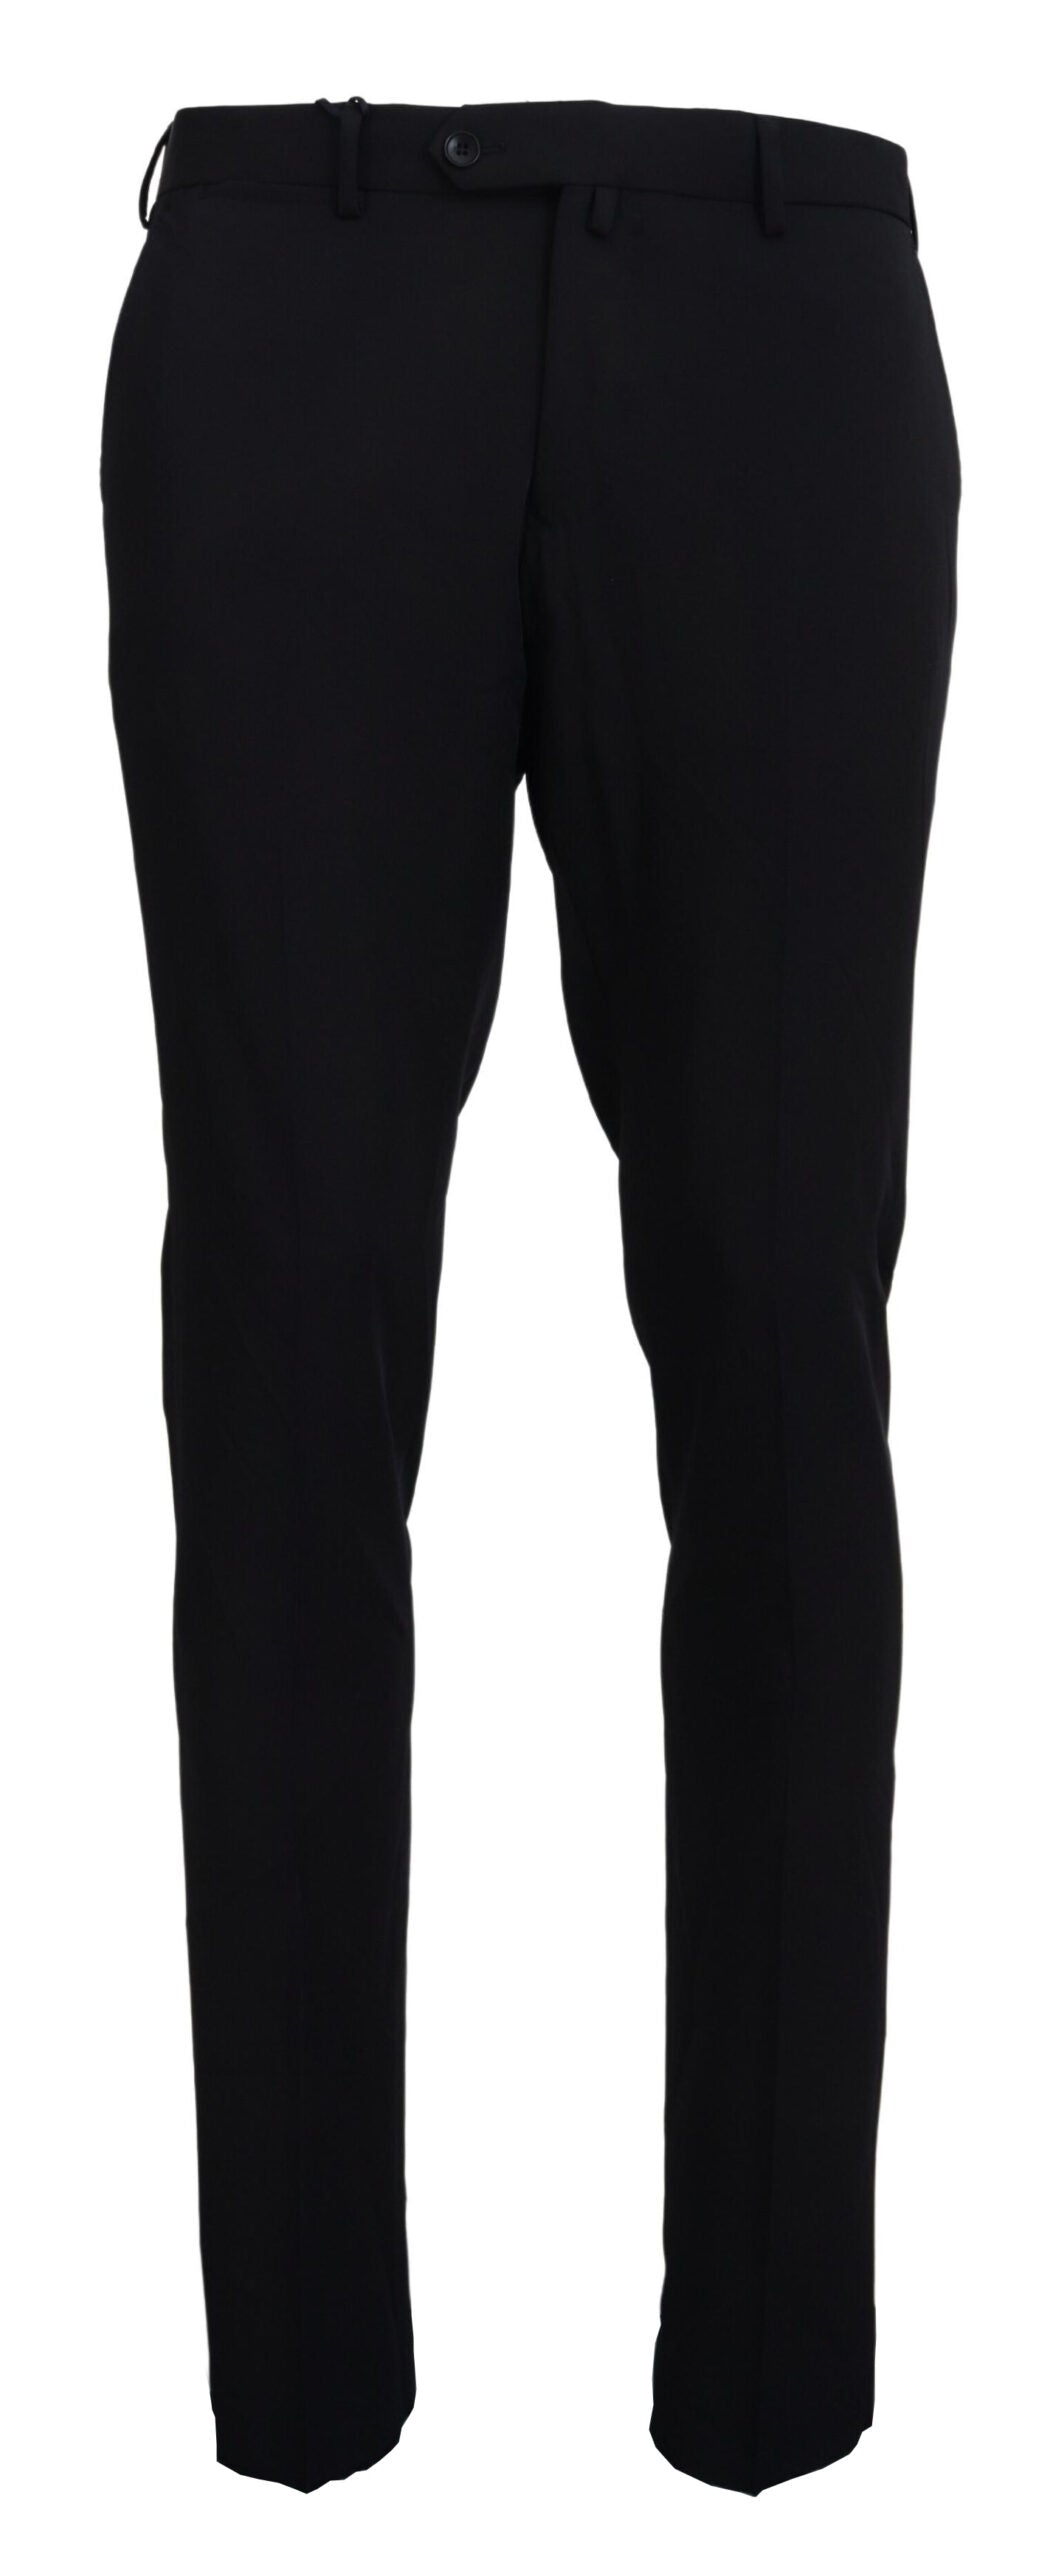 Domenico Tagliente Black Polyester Tapered Dress Pants - Designed by Domenico Tagliente Available to Buy at a Discounted Price on Moon Behind The Hill Online Designer Discount Store